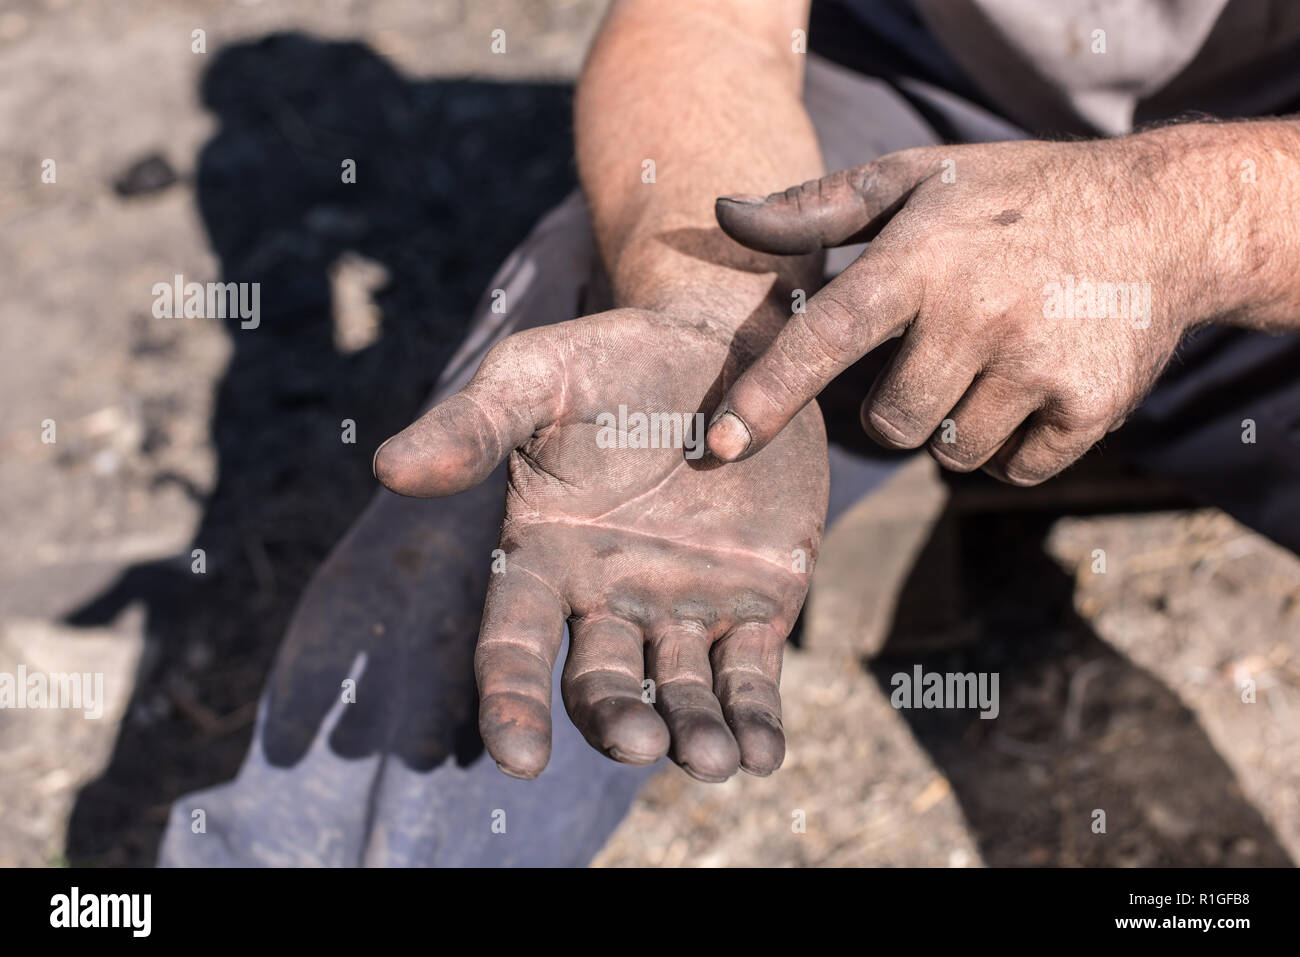 Worker Man with Dirty Hands. Charcoal-burners worker man with dirty hands. Stock Photo